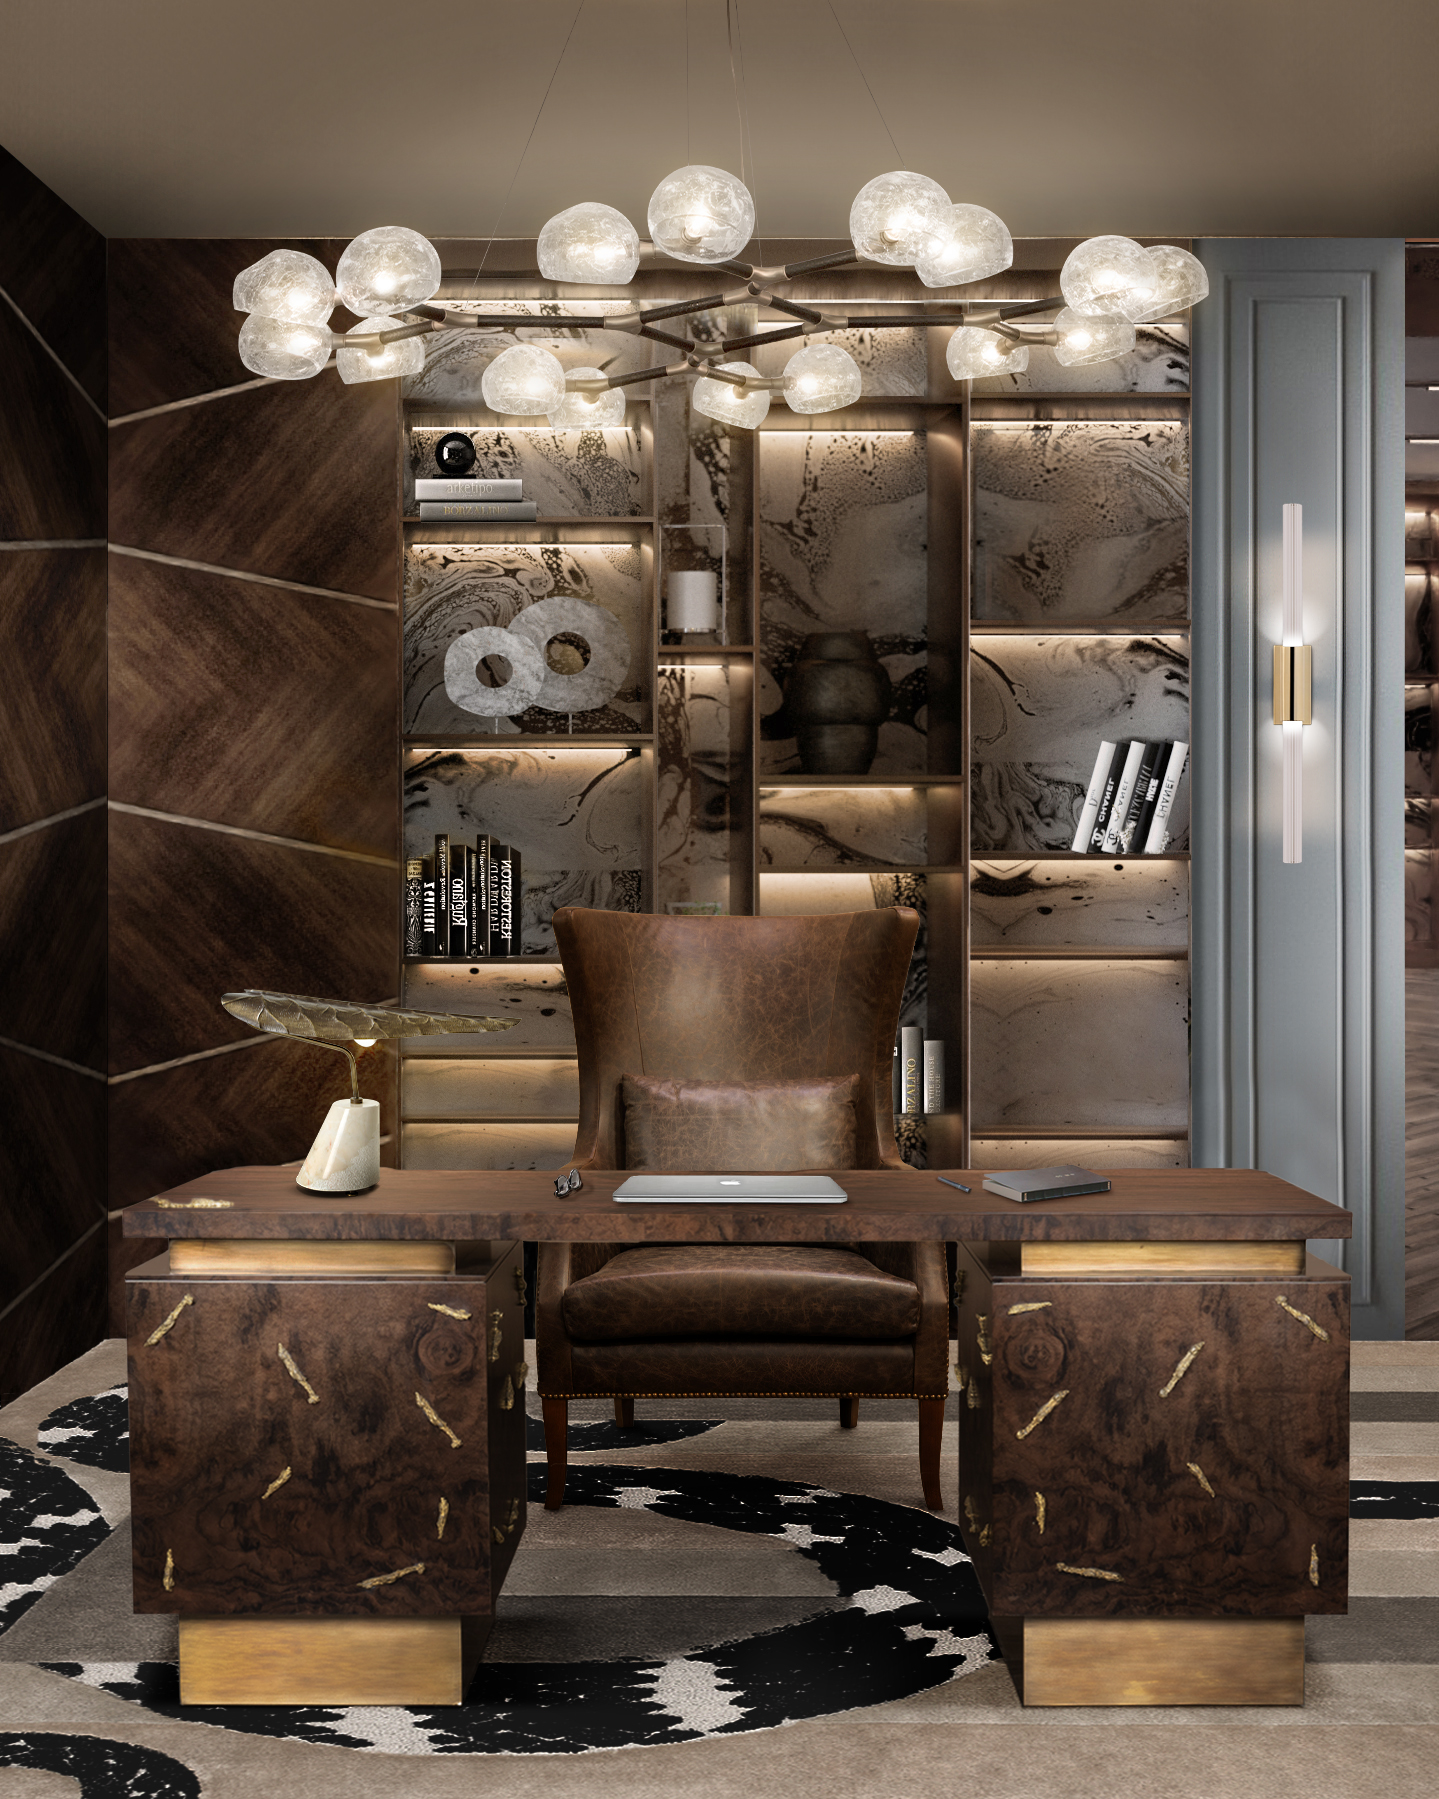 Chic Office Design in Brown - Home'Society